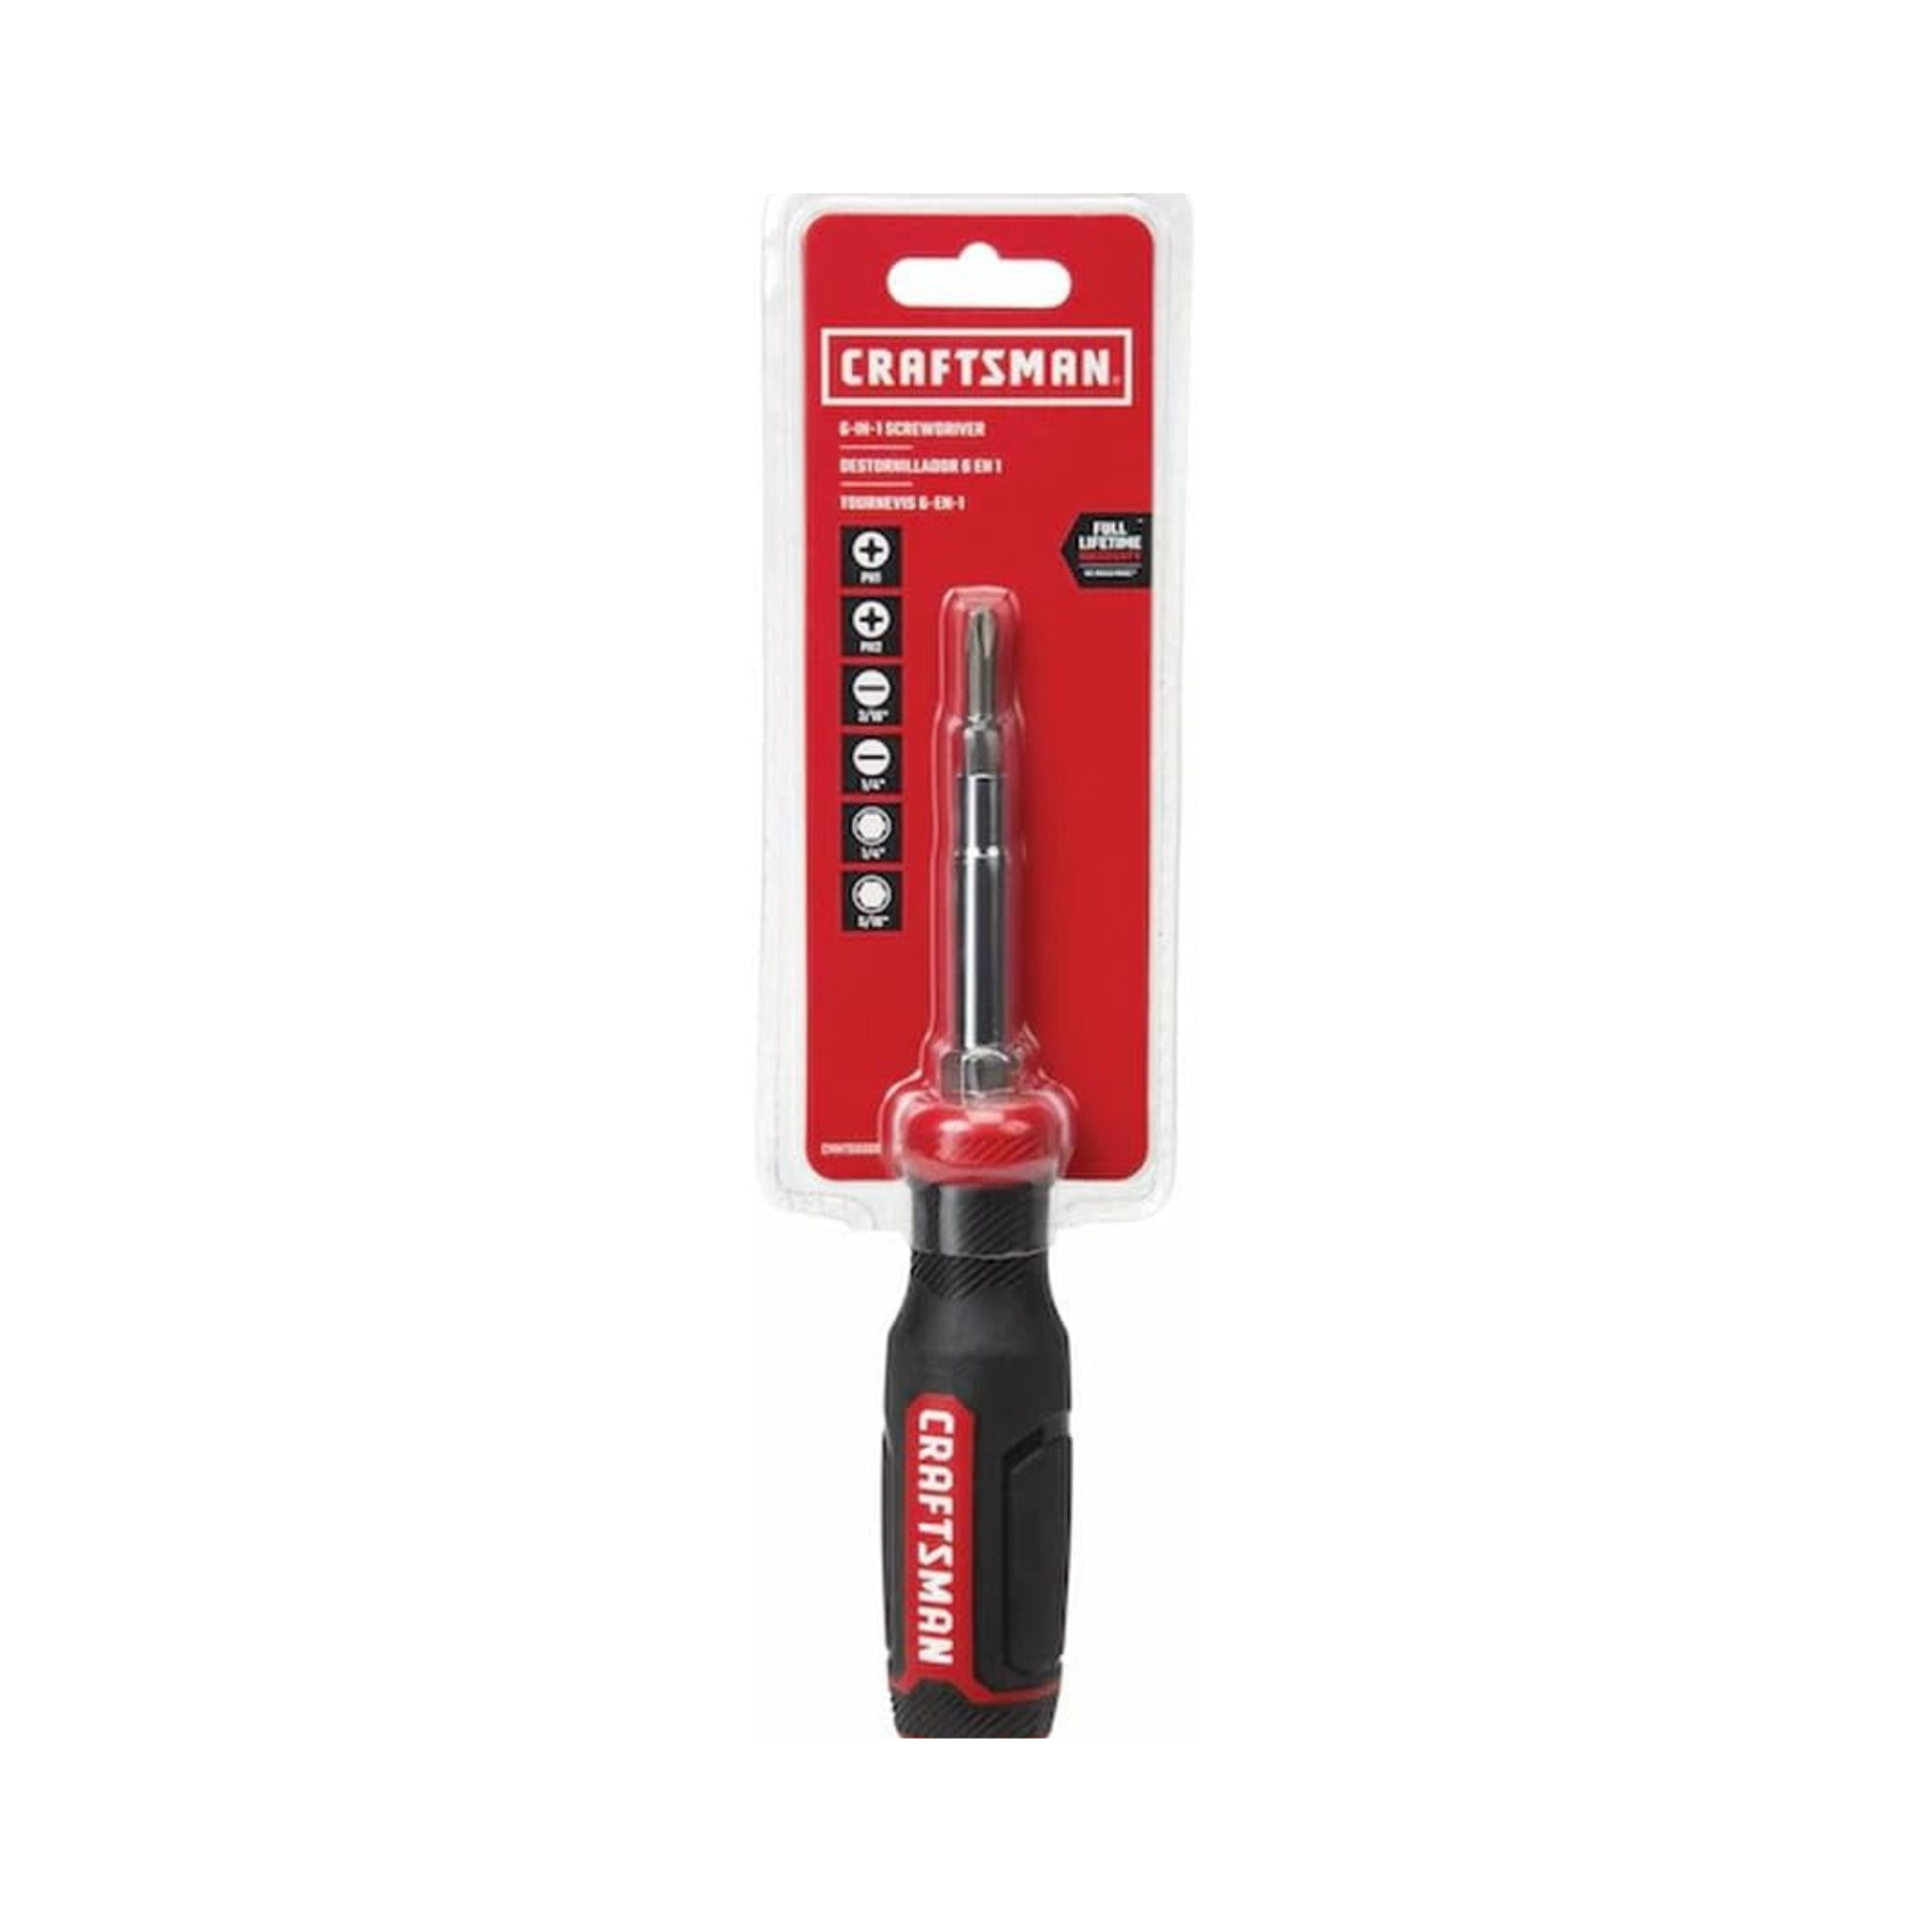 CRAFTSMAN Screwdriver with 6 Multi-Bits, Store Extra Bits in Handle